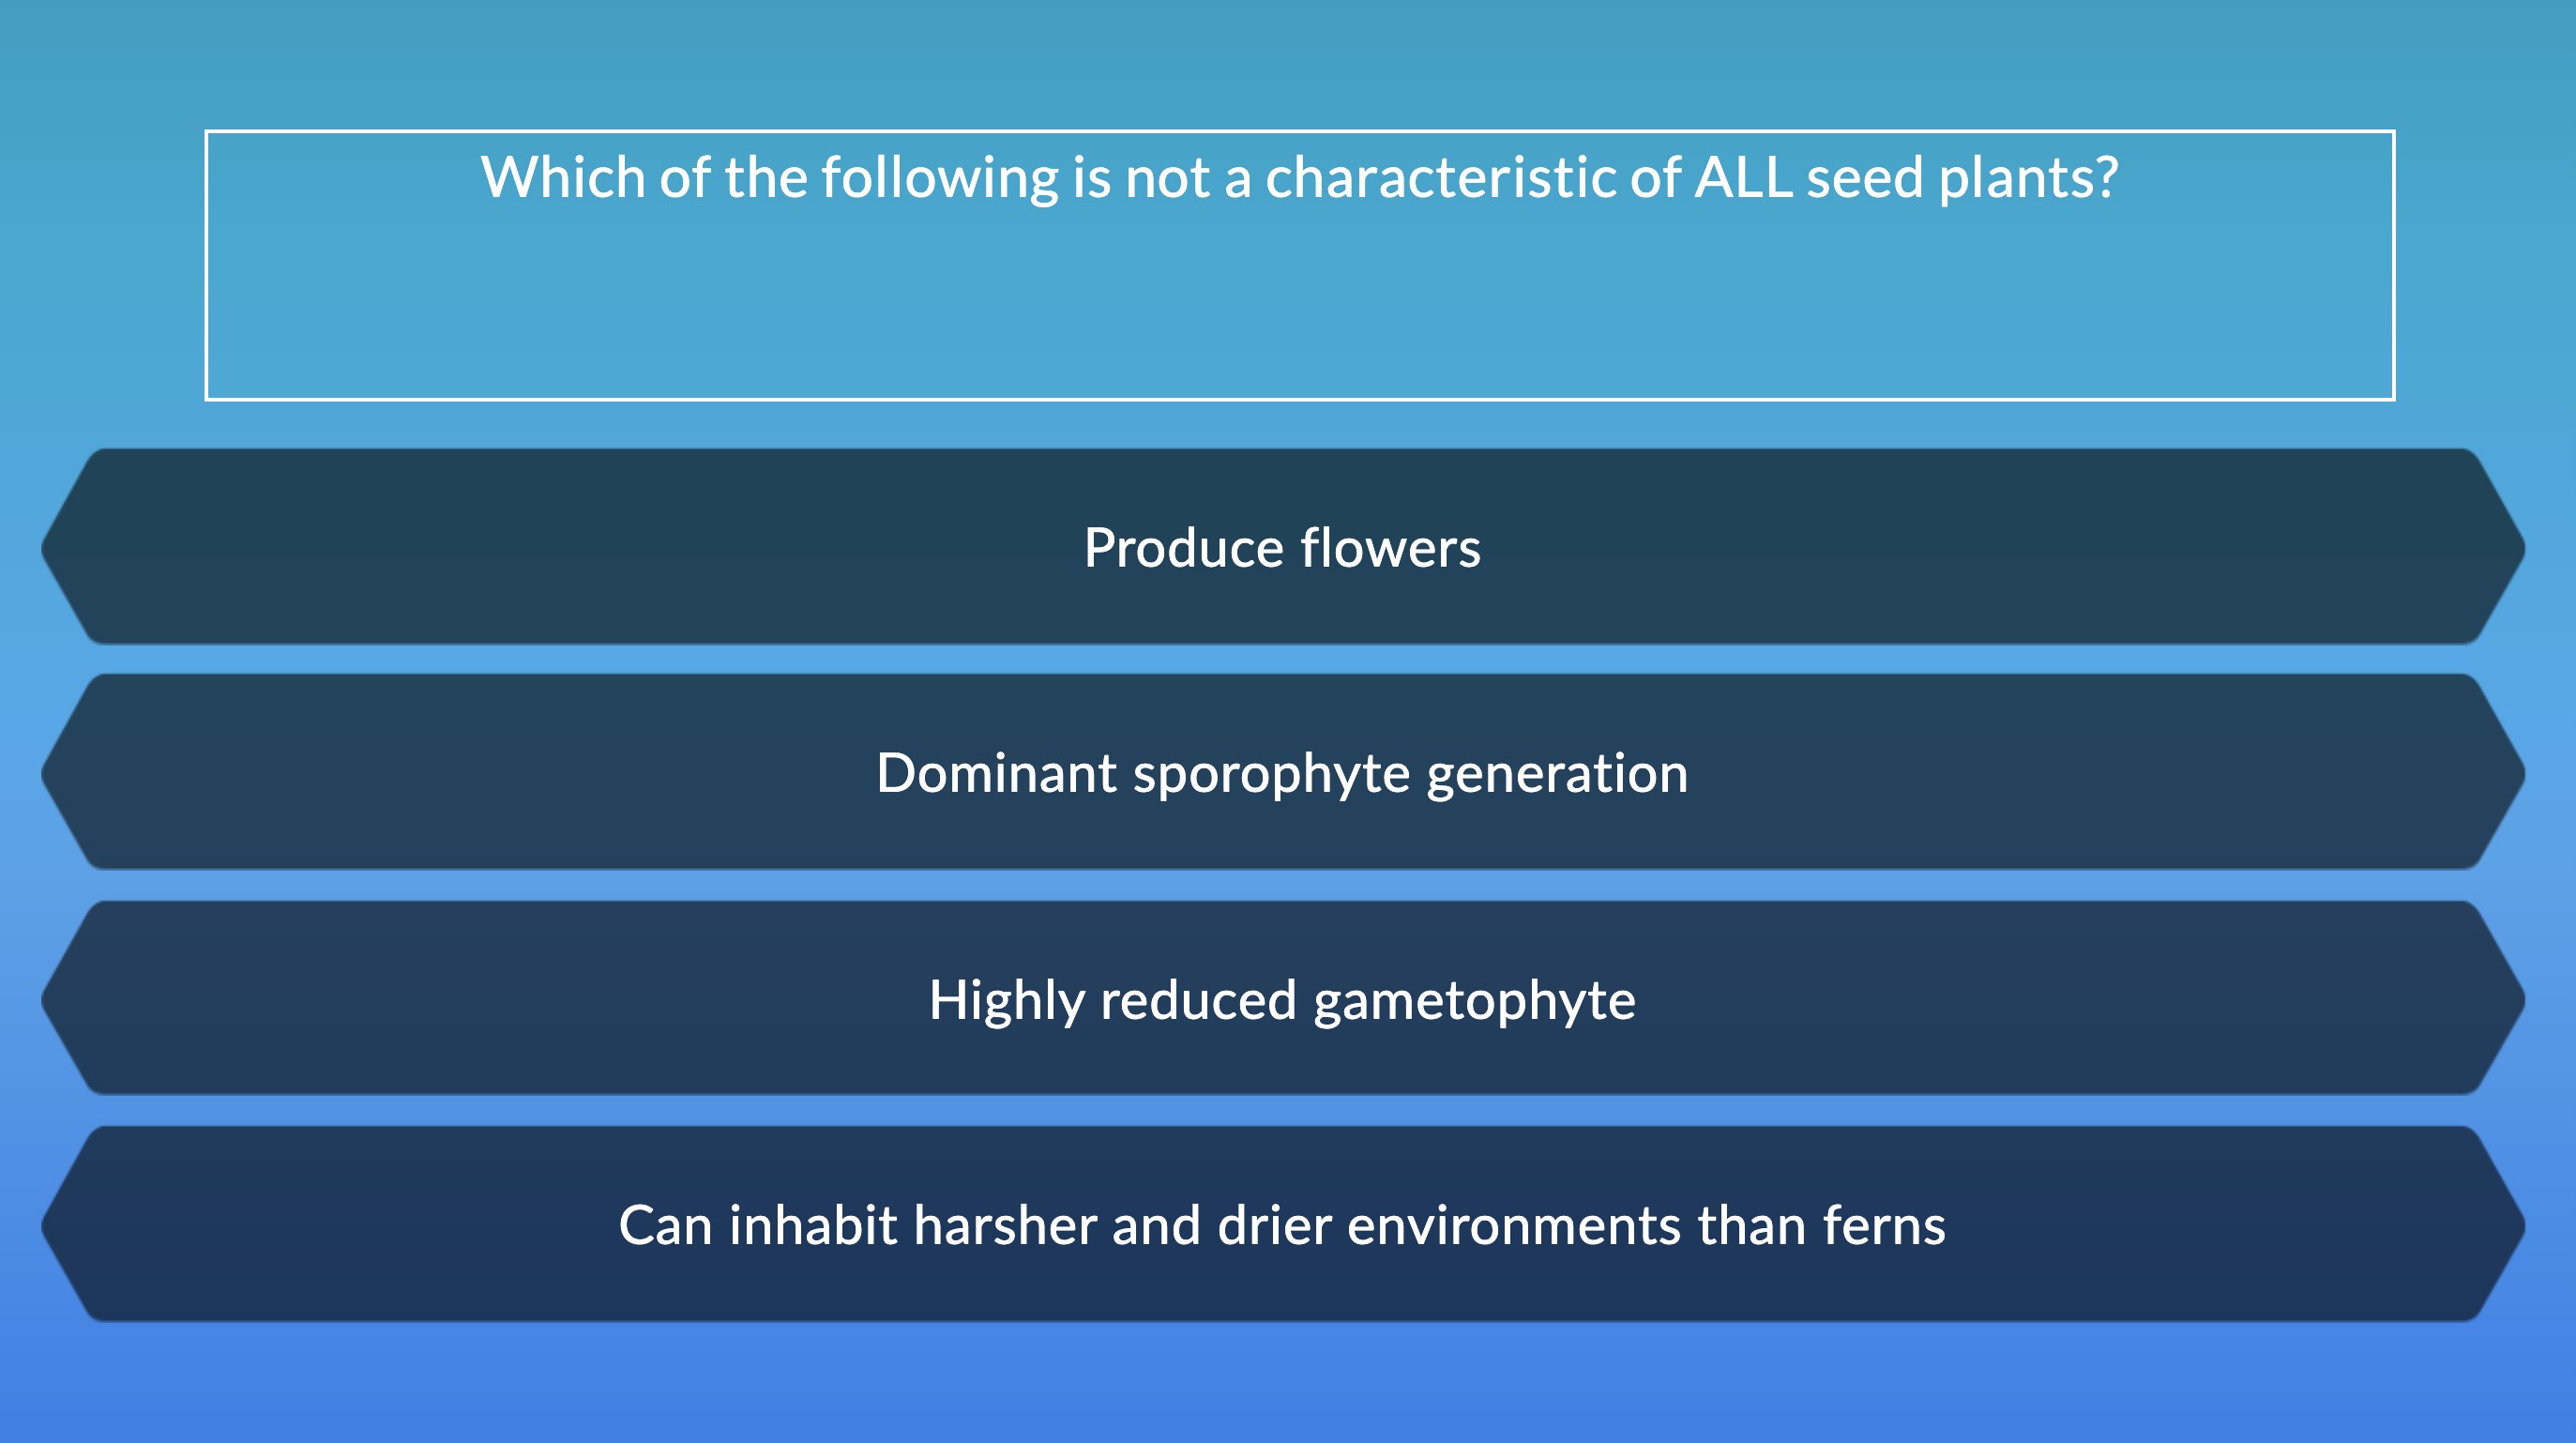 Which of the following is not a characteristic of ALL seed plants?
Produce flowers
Dominant sporophyte generation
Highly reduced gametophyte
Can inhabit harsher and drier environments than ferns
